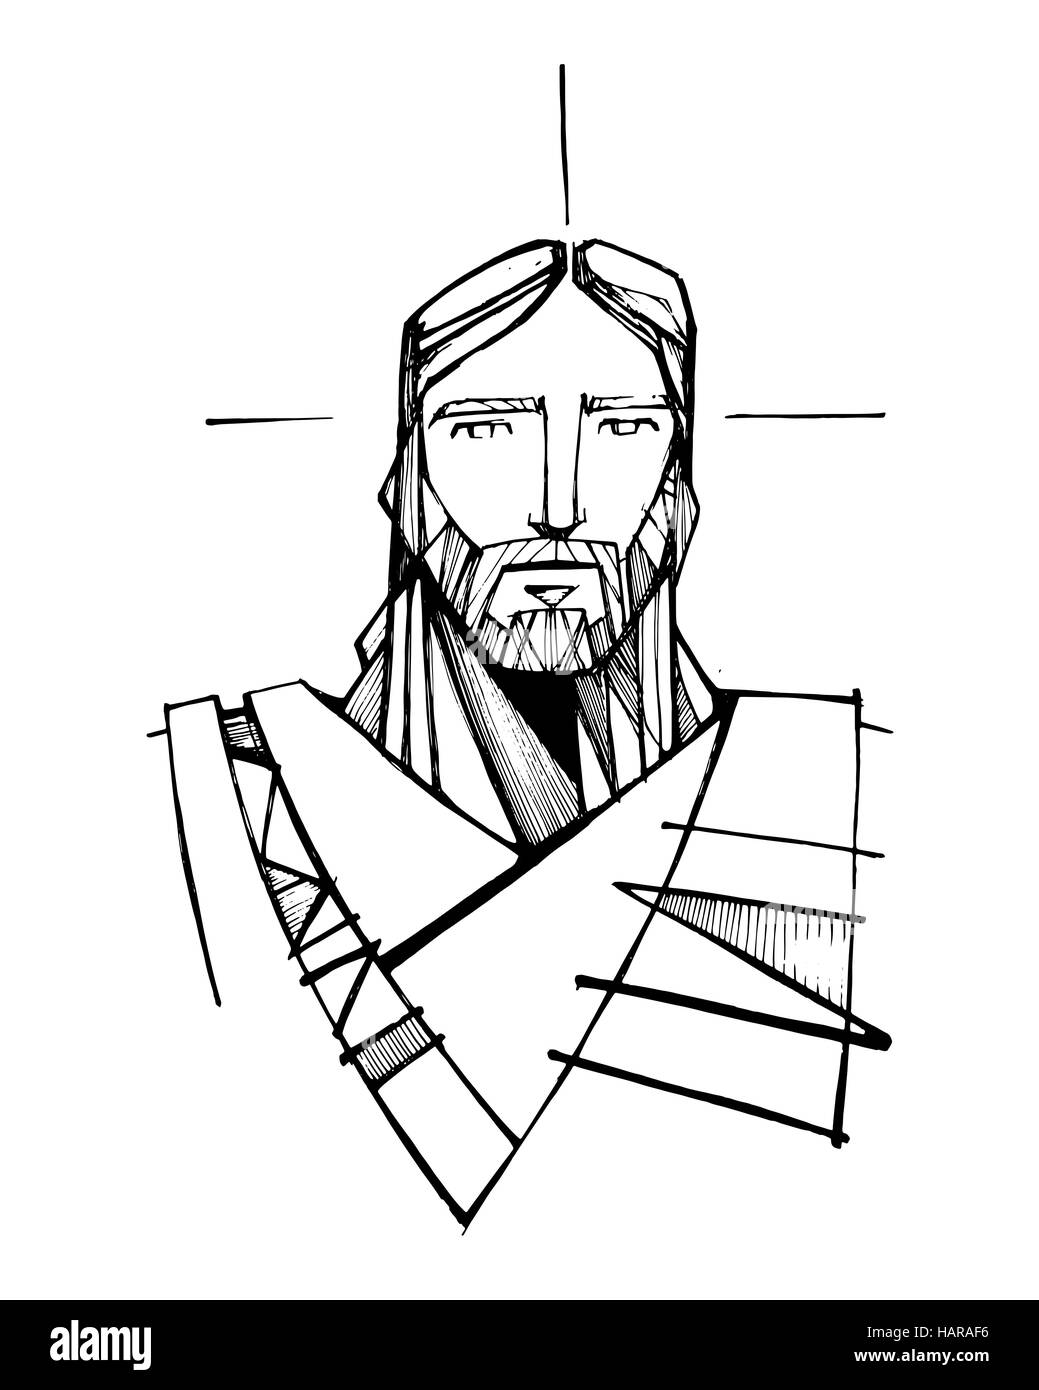 Hand drawn vector illustration or drawing of Jesus Christ face Stock Photo